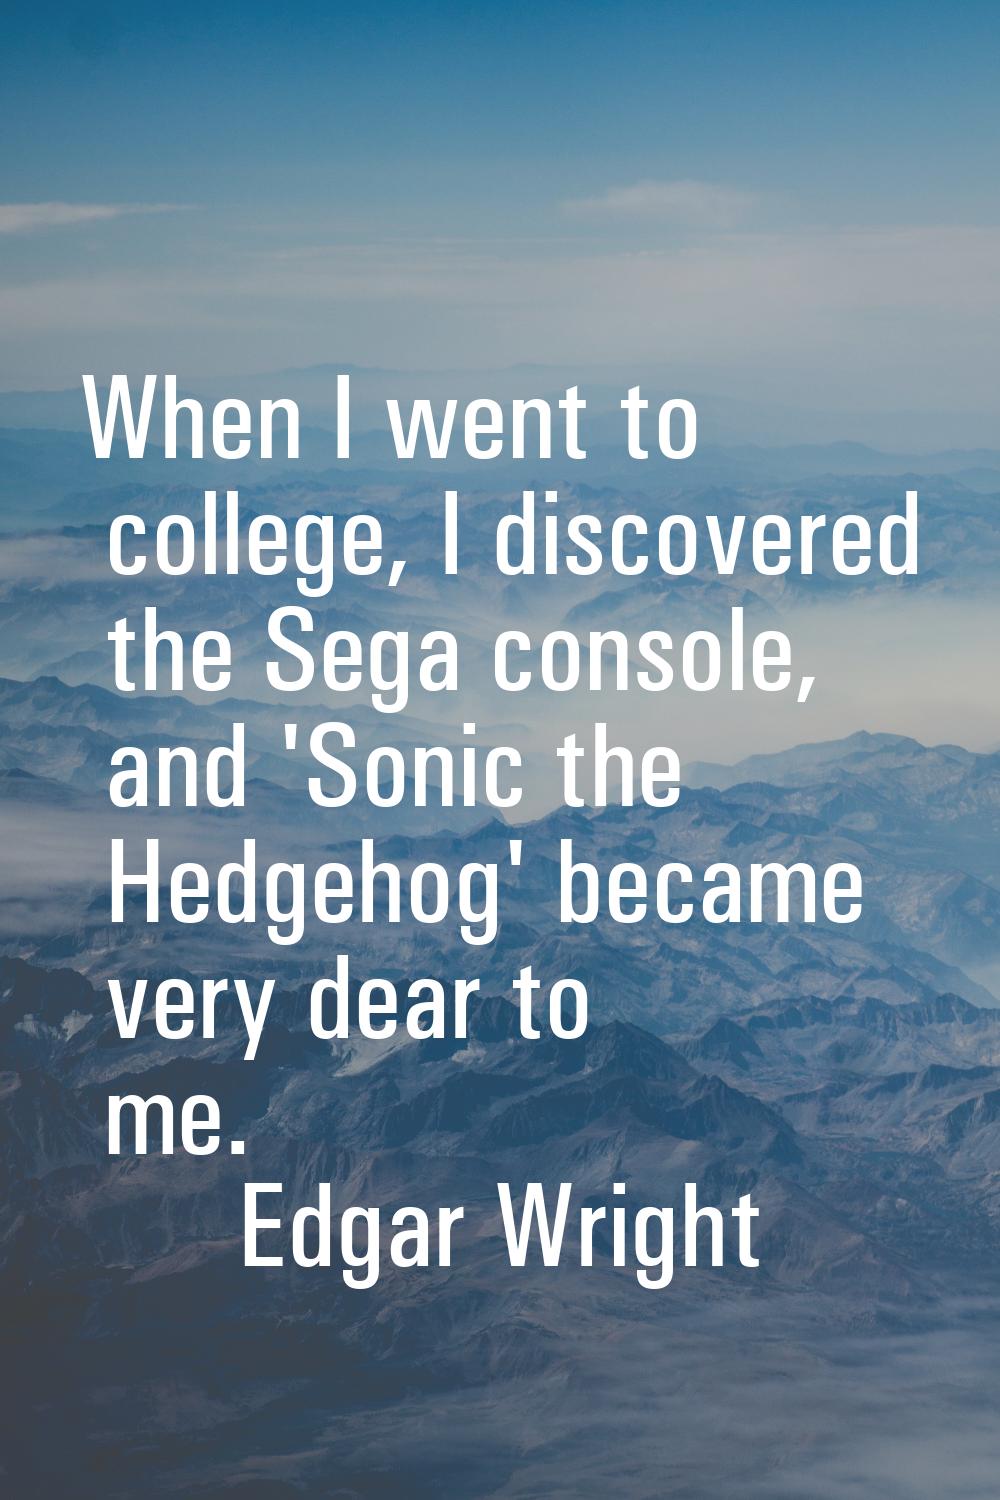 When I went to college, I discovered the Sega console, and 'Sonic the Hedgehog' became very dear to